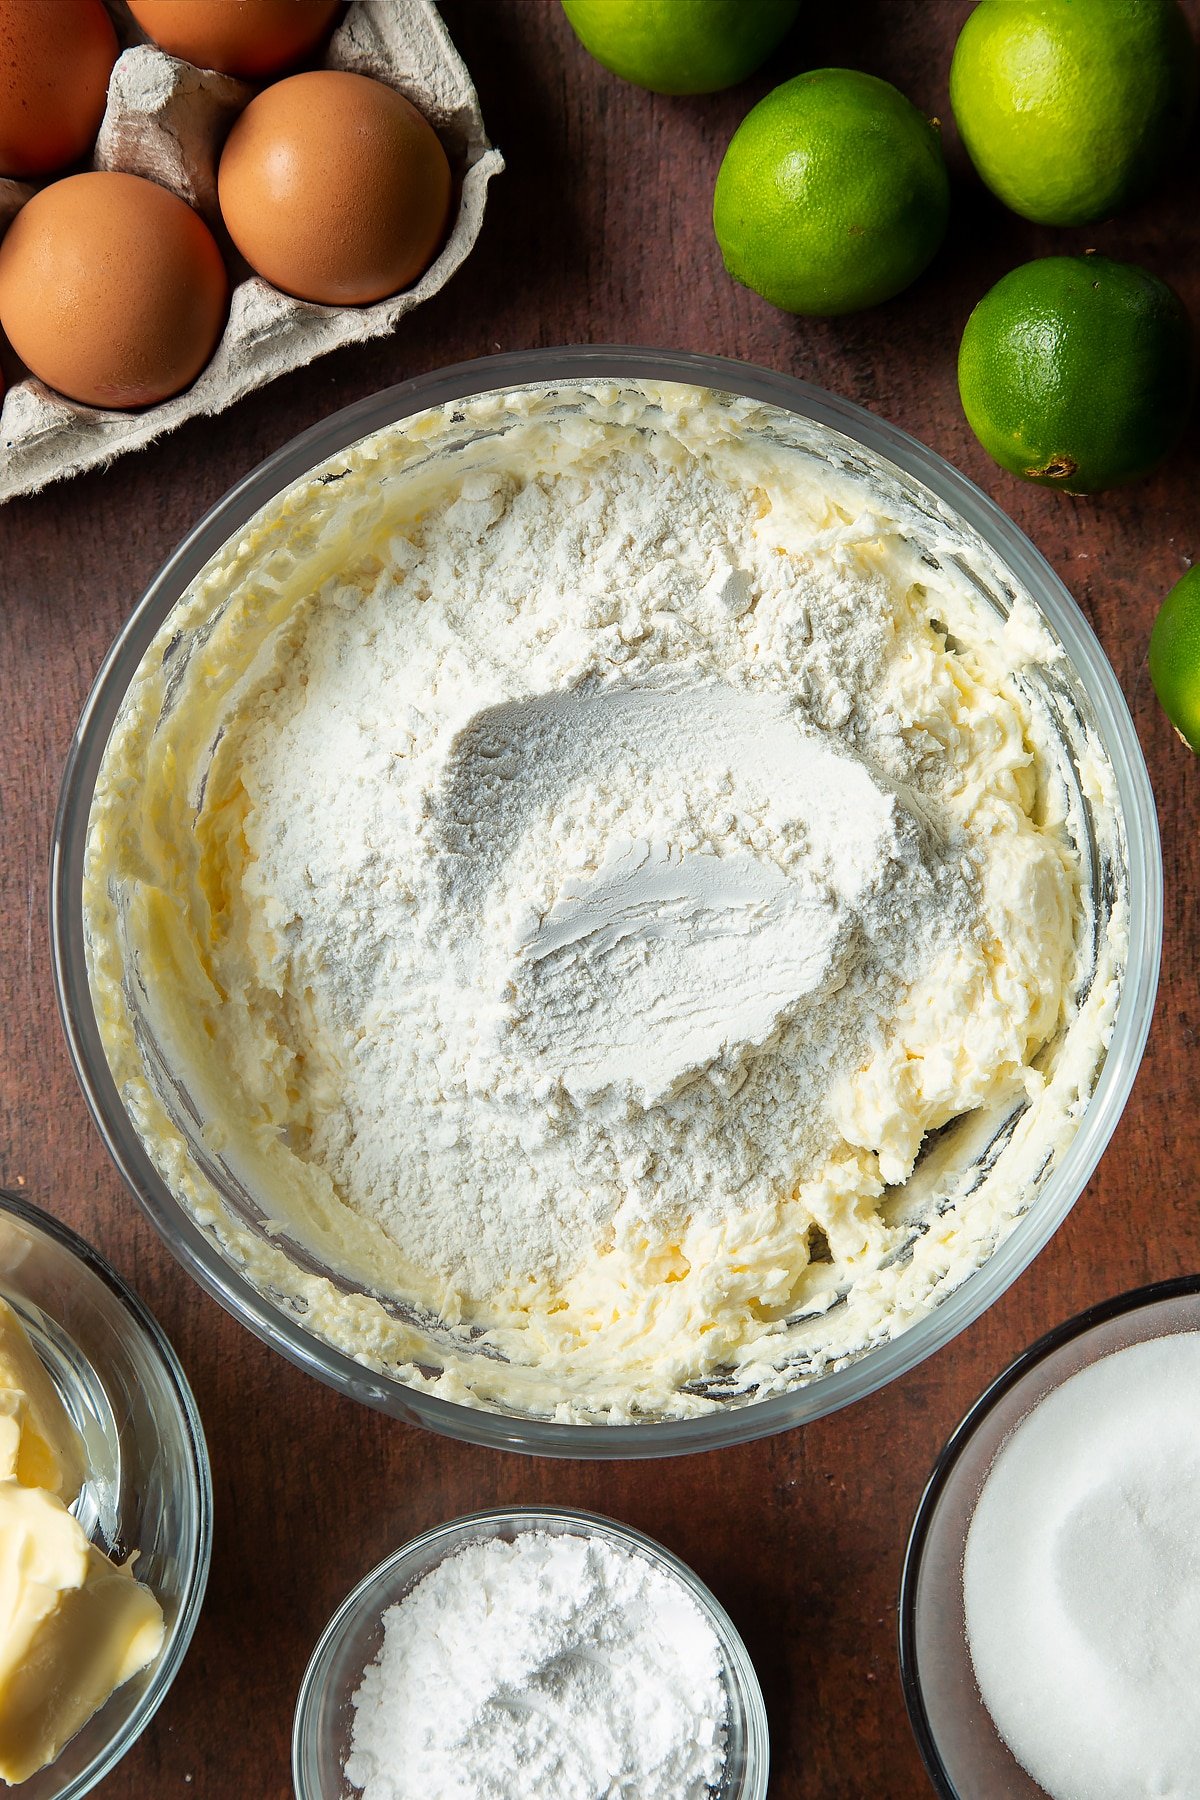 Butter, sugar and eggs beaten together in a mixing bowl with self-raising flour on top. Ingredients to make lime drizzle cake surround the bowl.